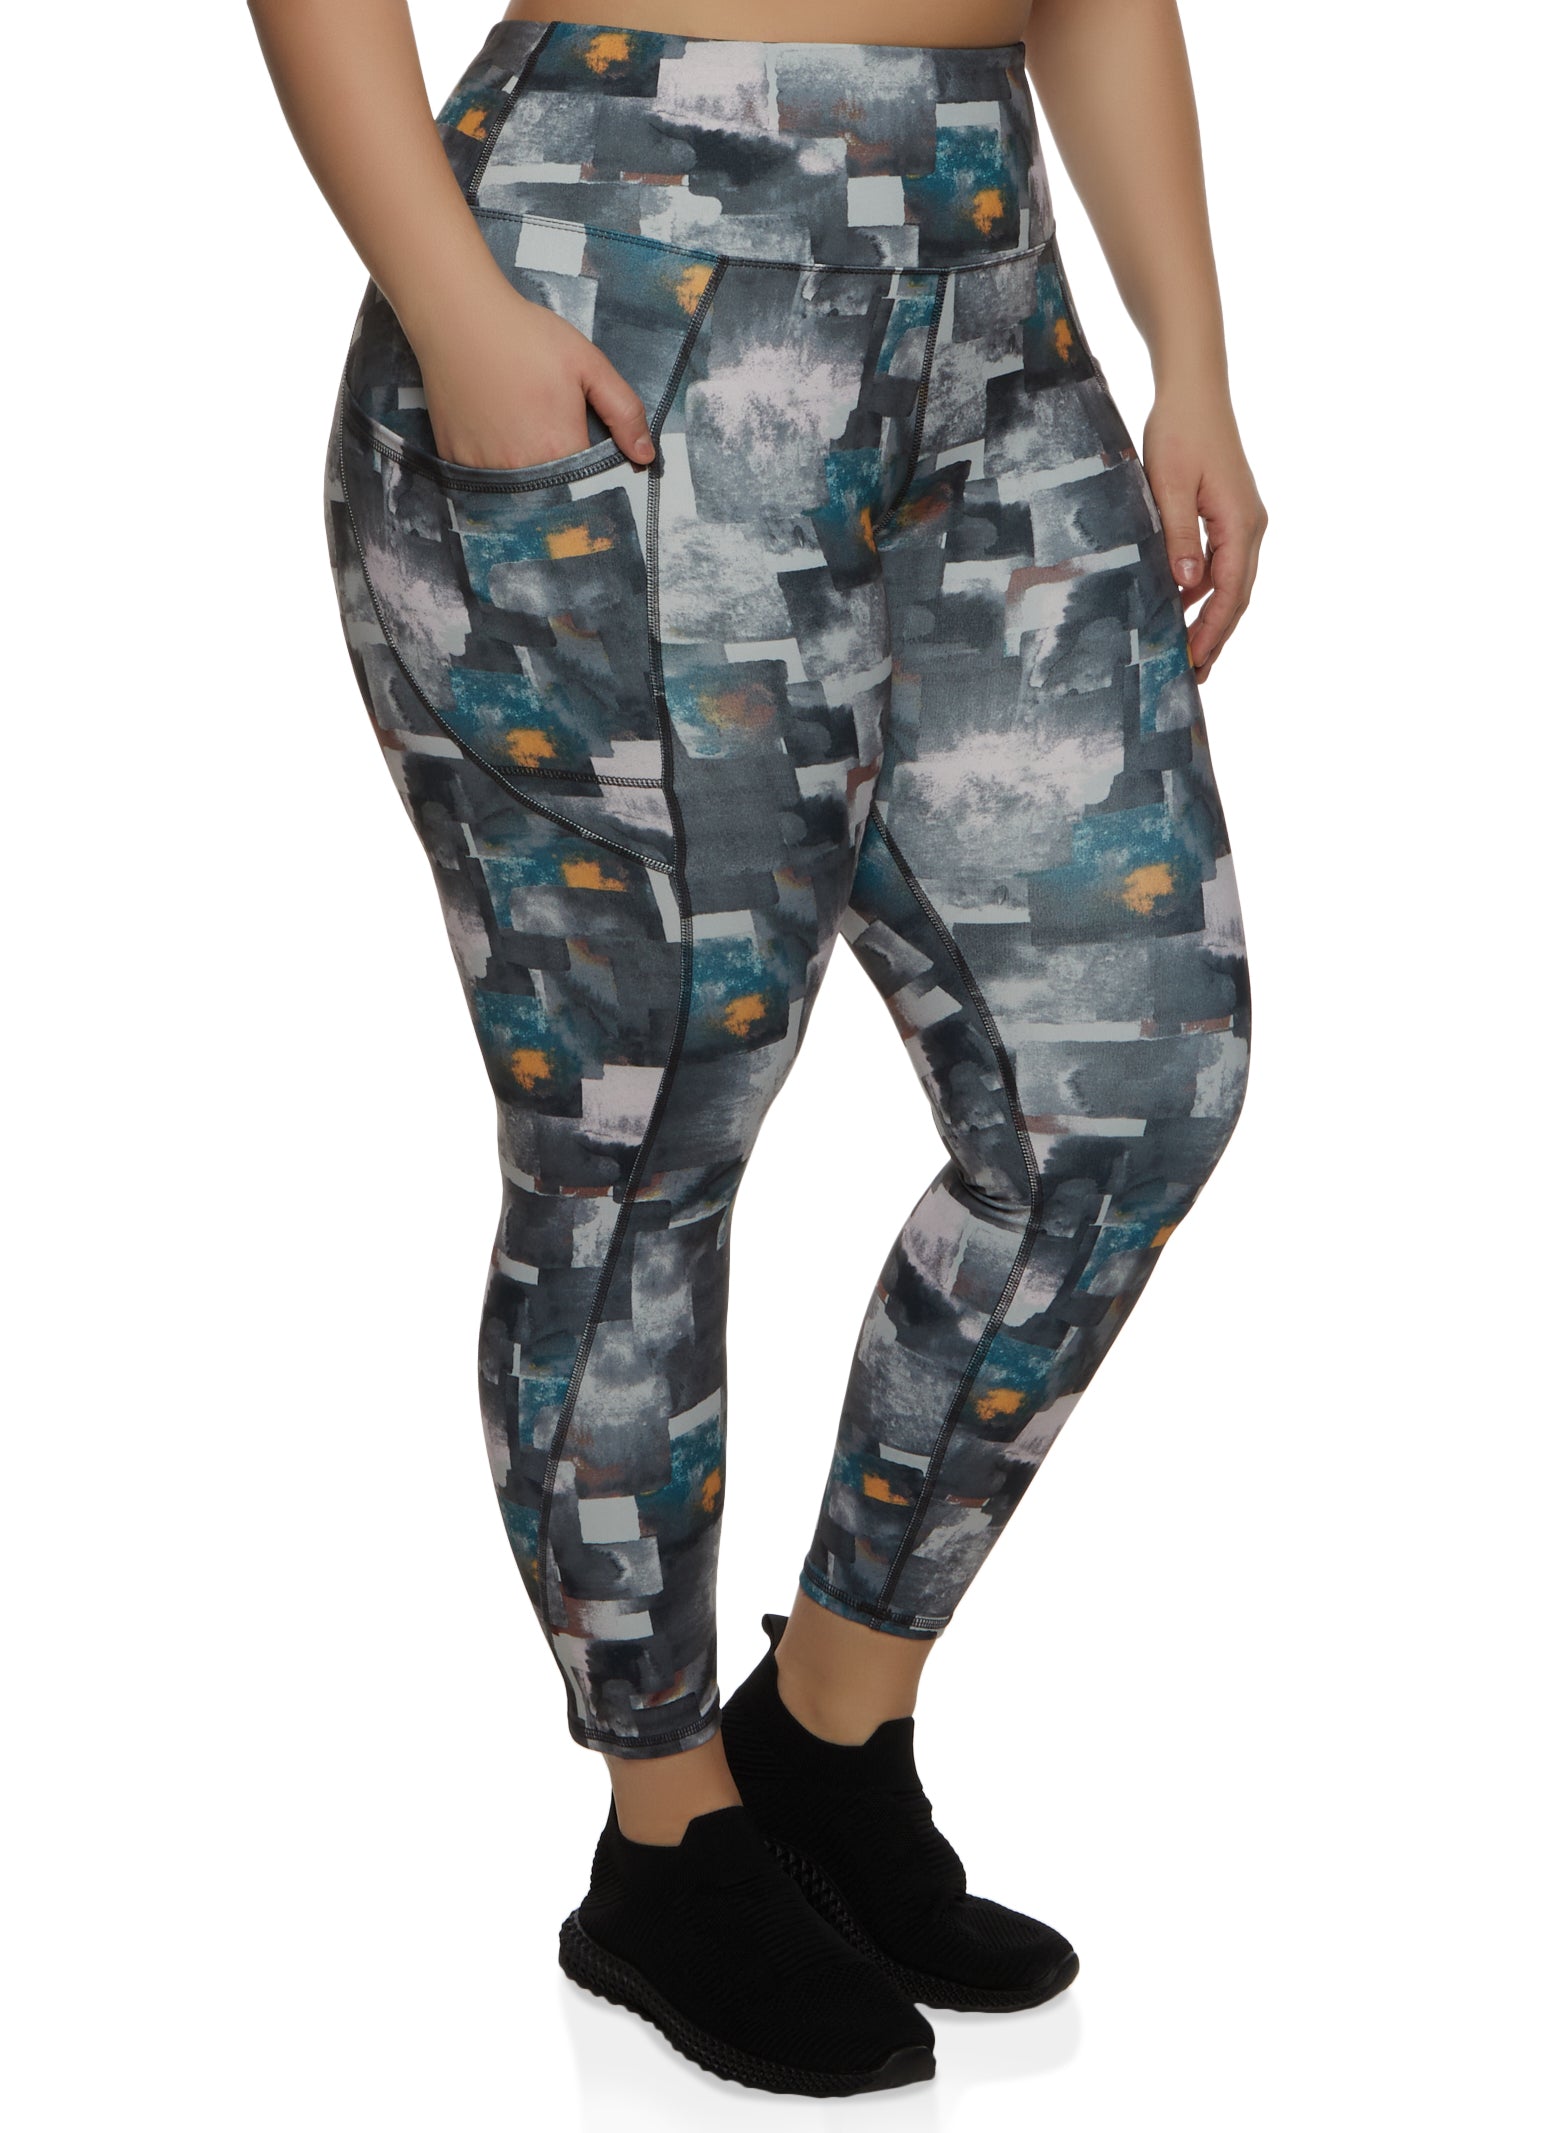 Plus Size Activewear and Loungewear, Everyday Low Prices